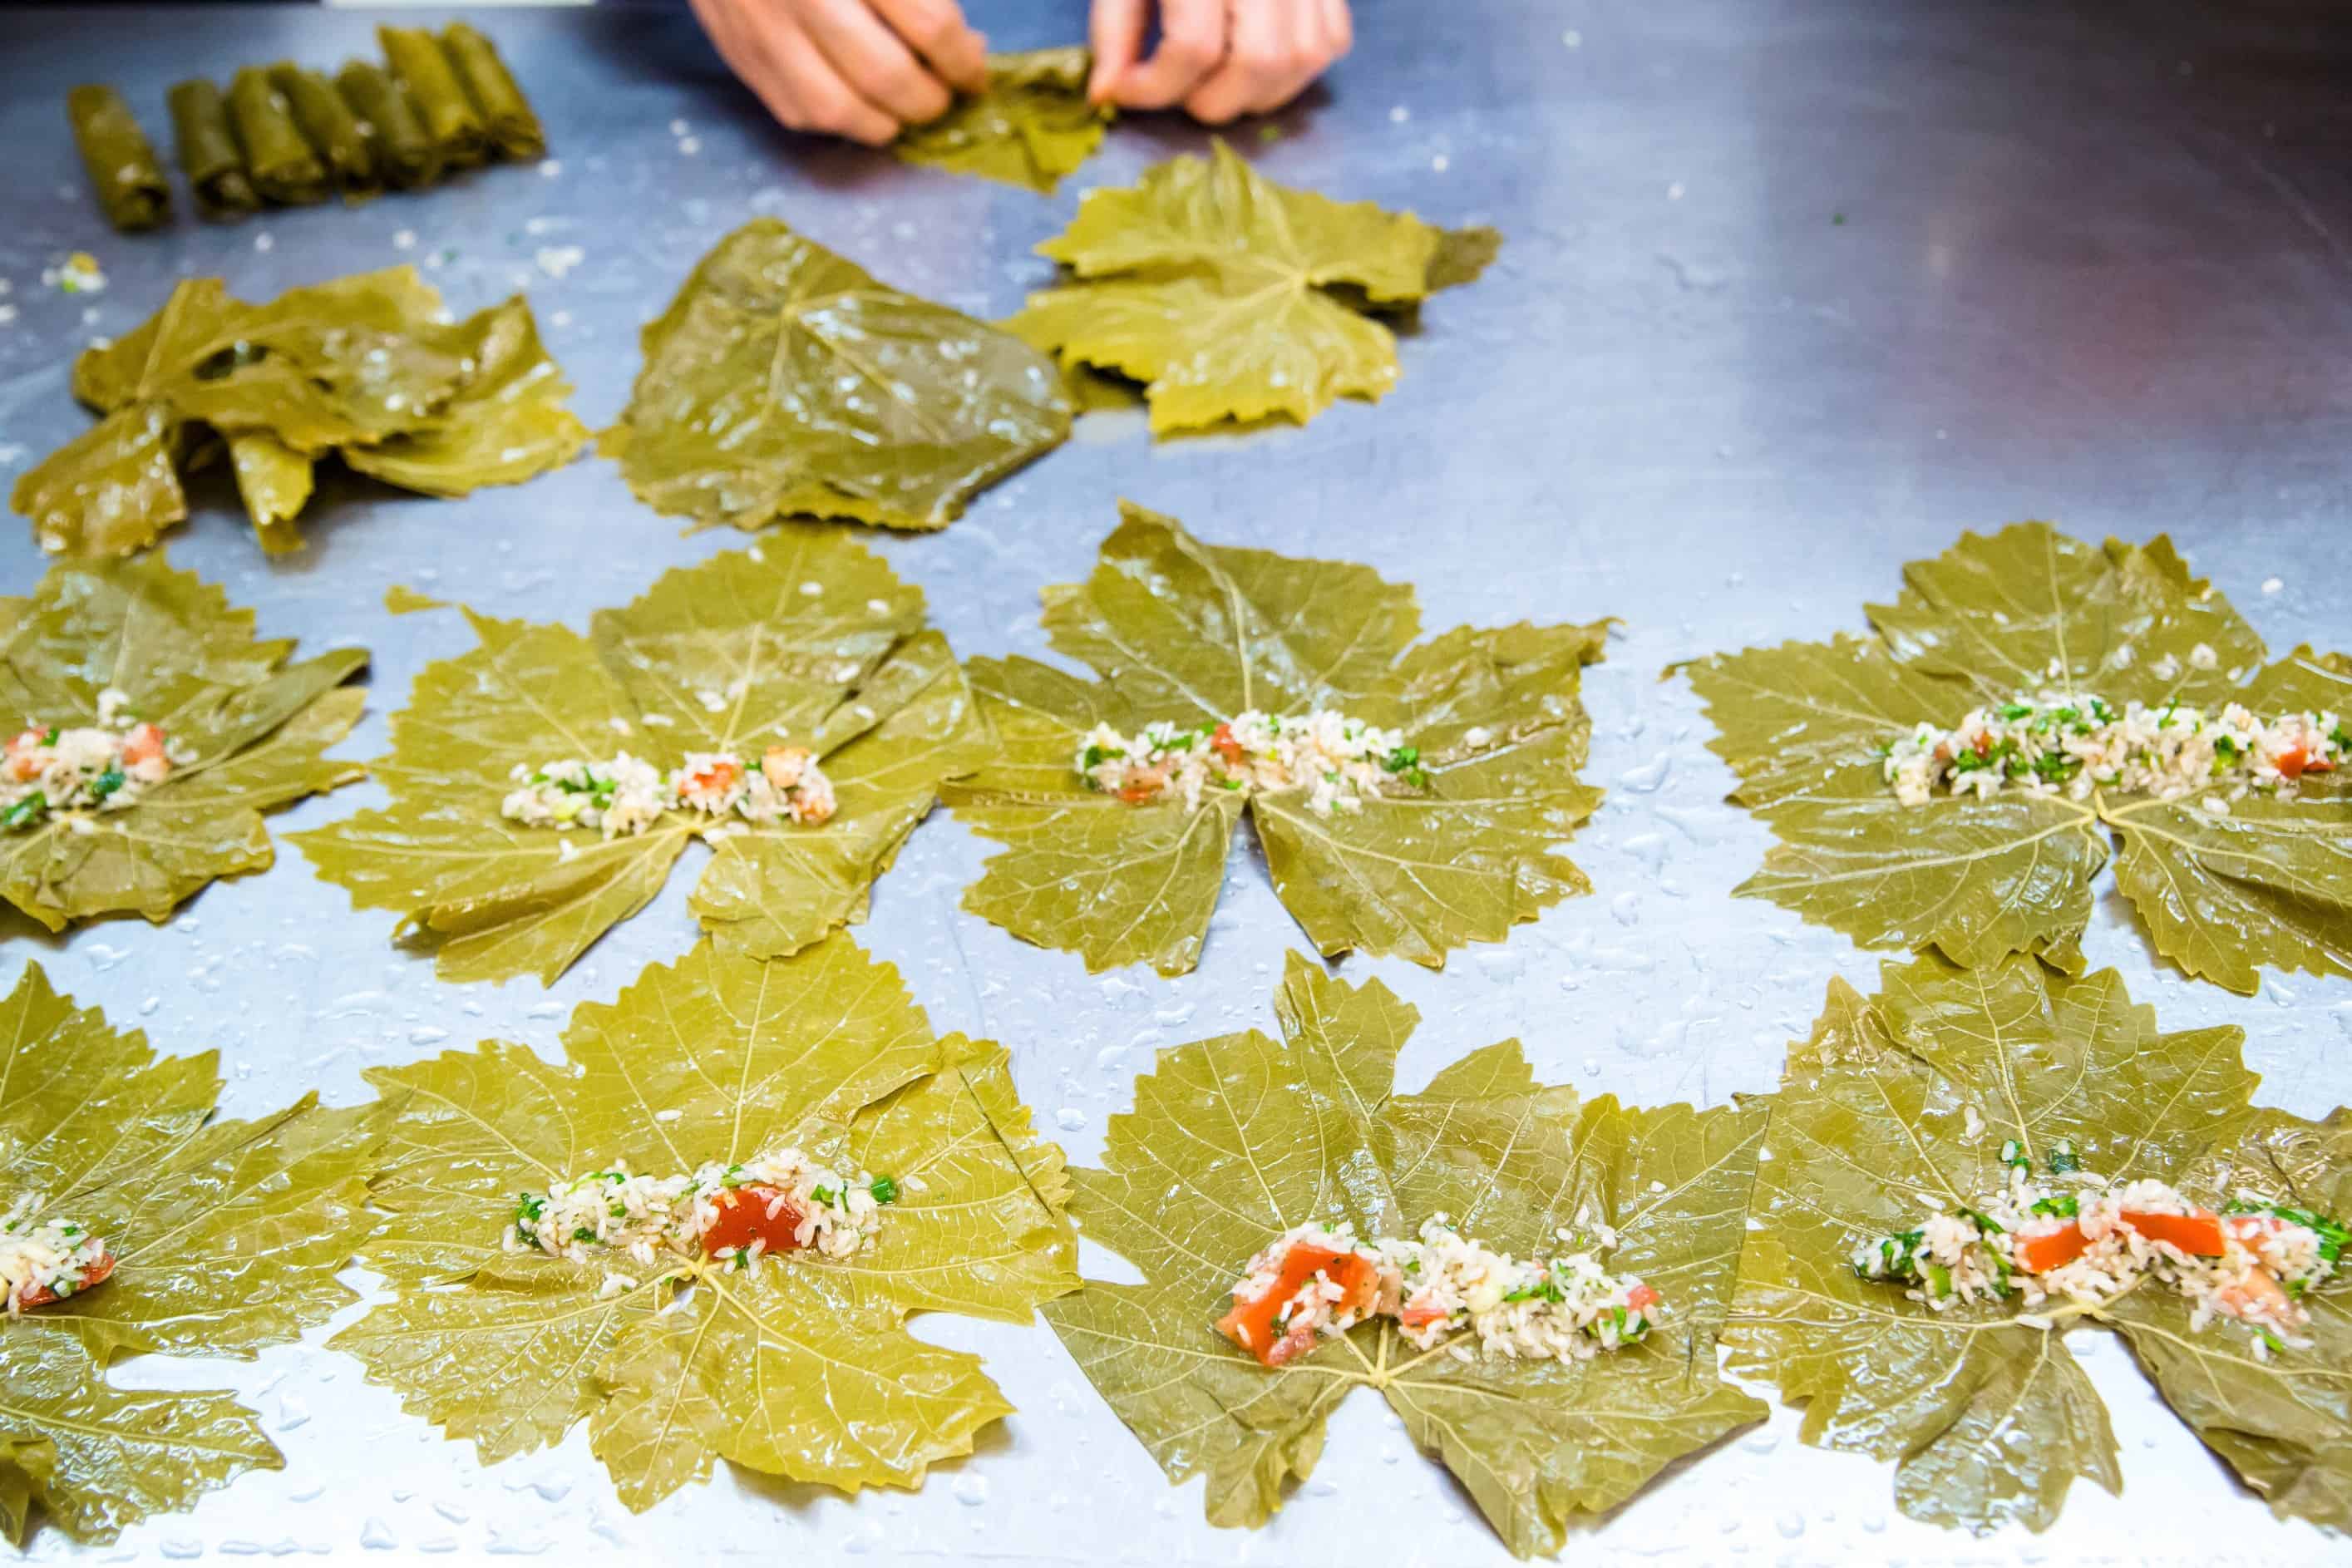 Grape leaves look a lot like maple leaves. Everyone expresses gratitude that they are able to share their traditions with their new Canadian community.| Rebecca Lippiatt